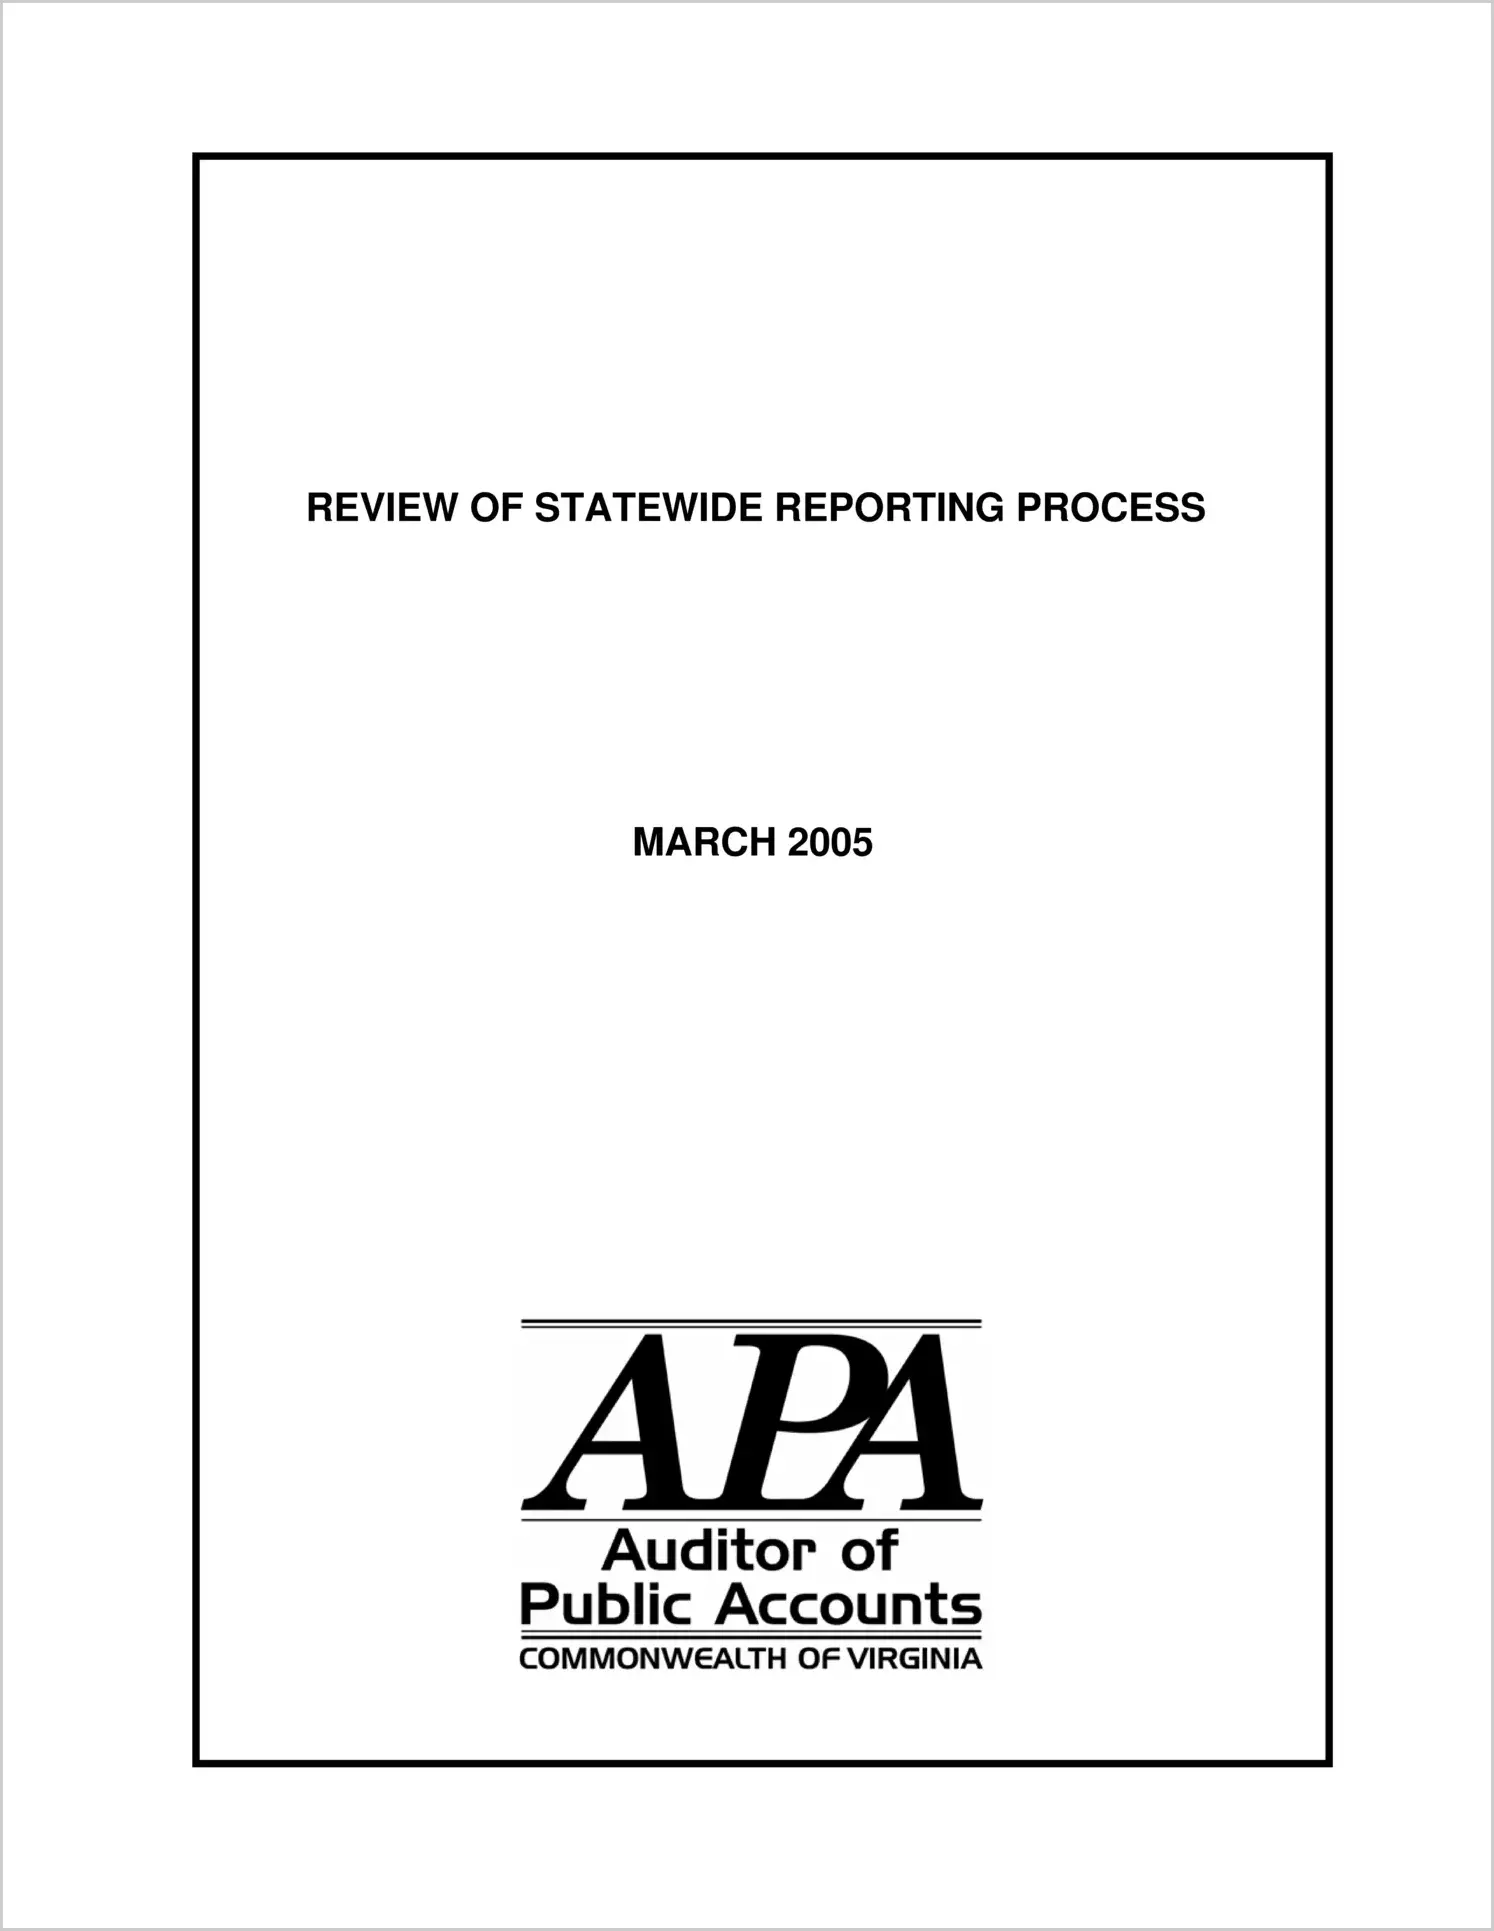 Review of Statewide Reporting Process - March 2005